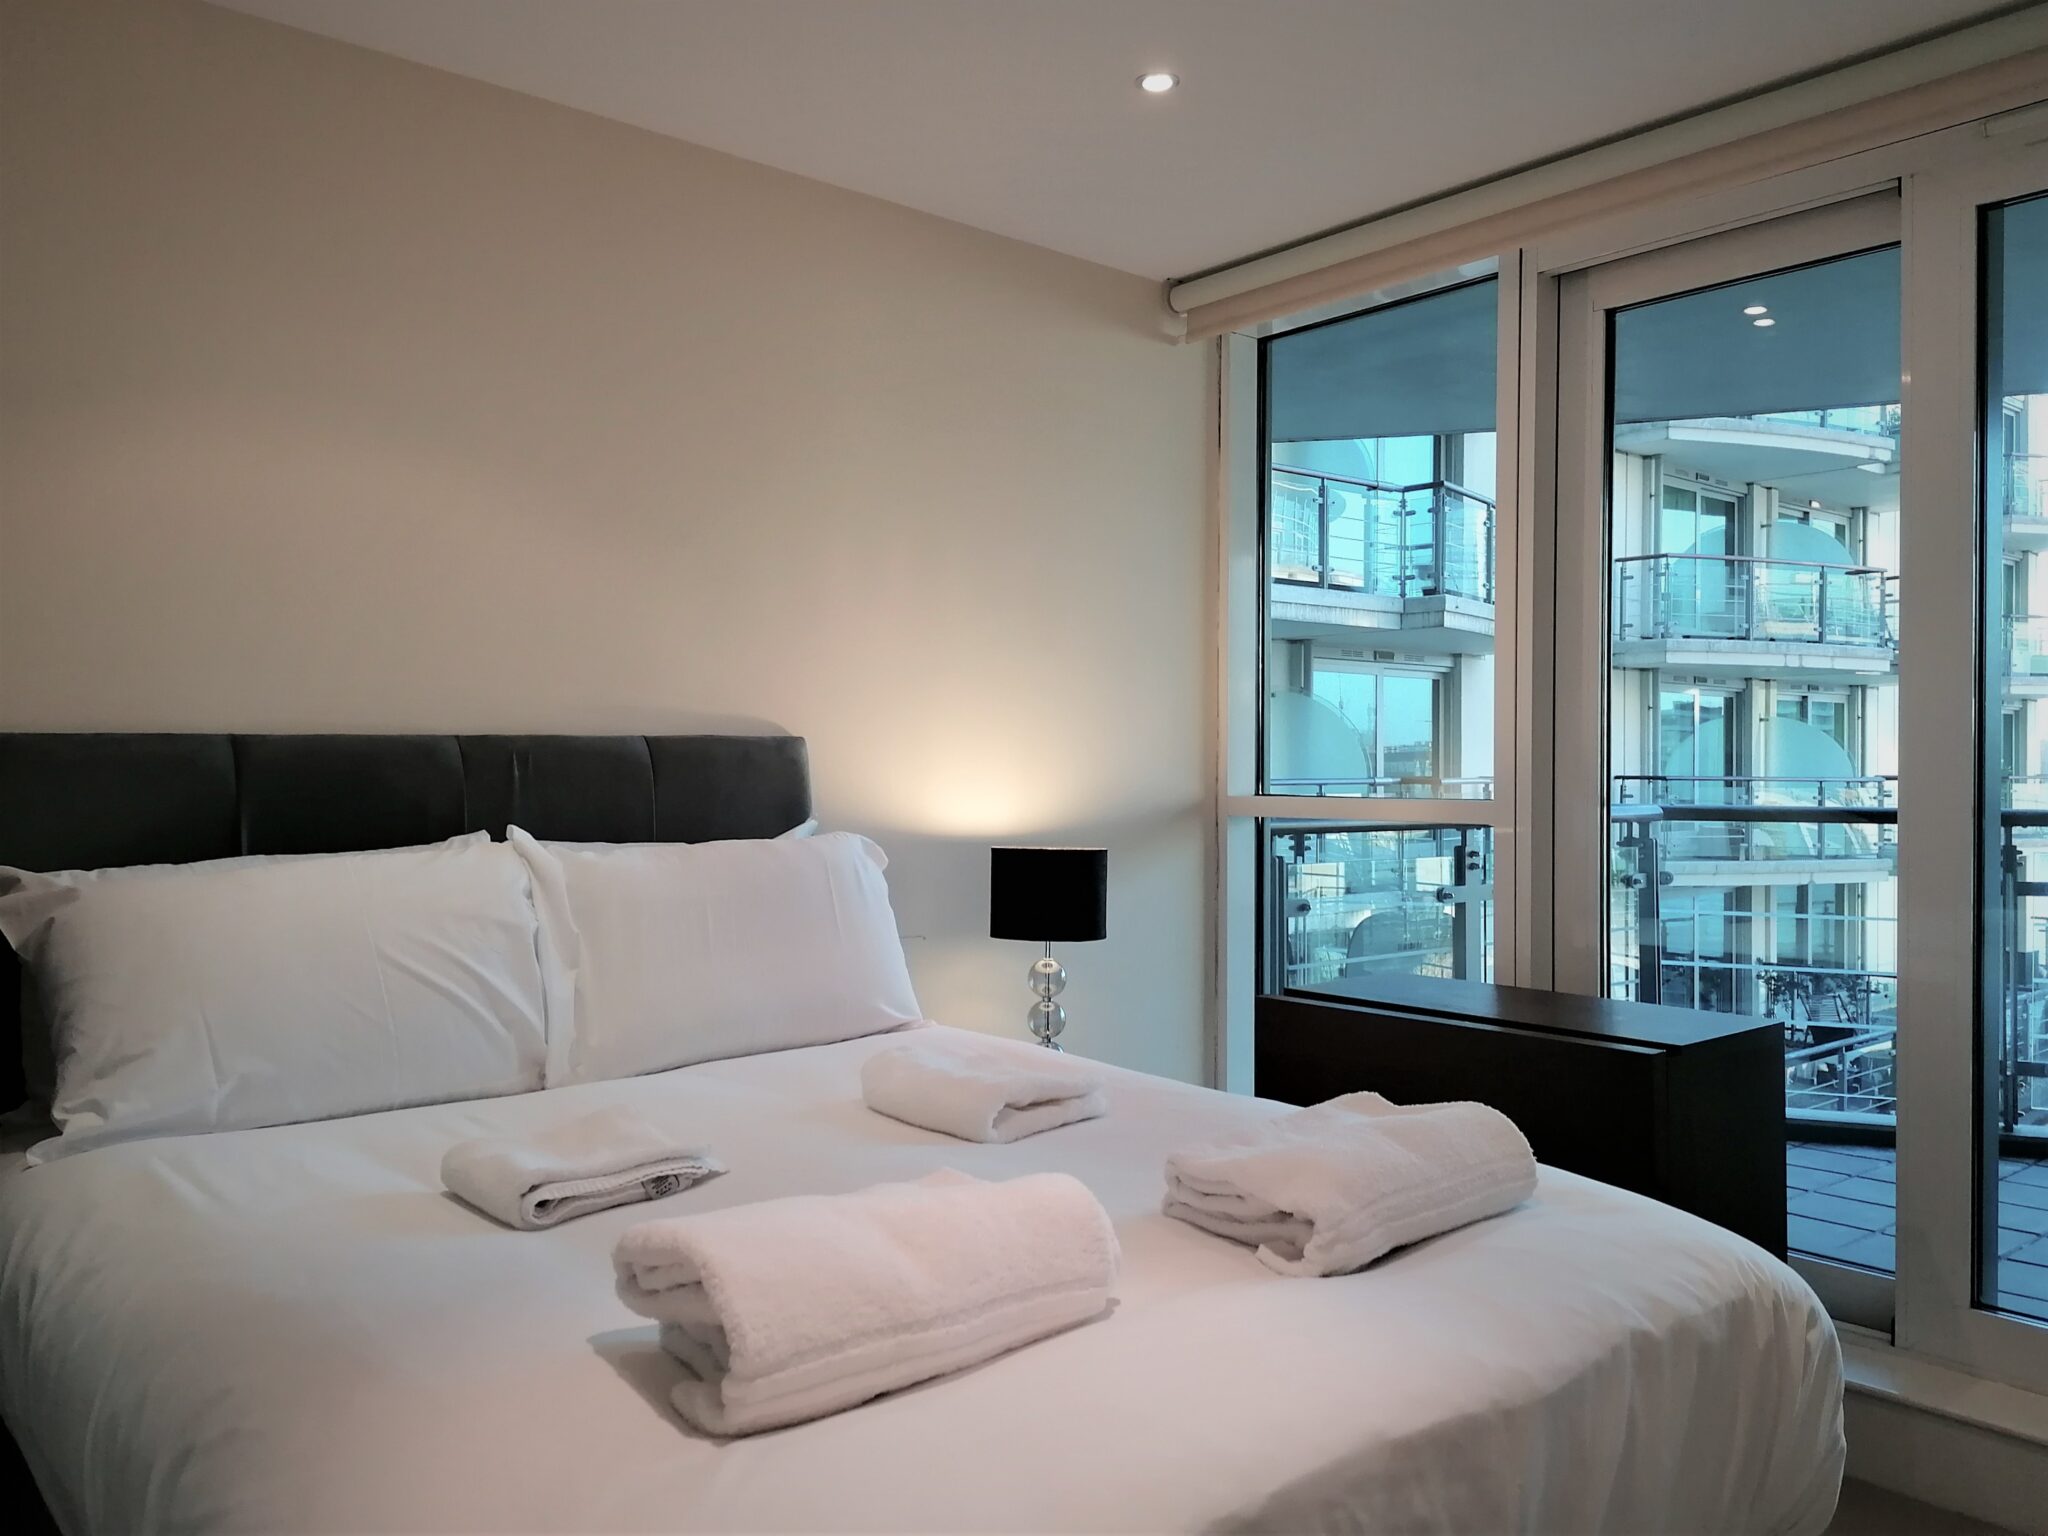 Watford Apartments - West London Serviced Apartments - London | Urban Stay